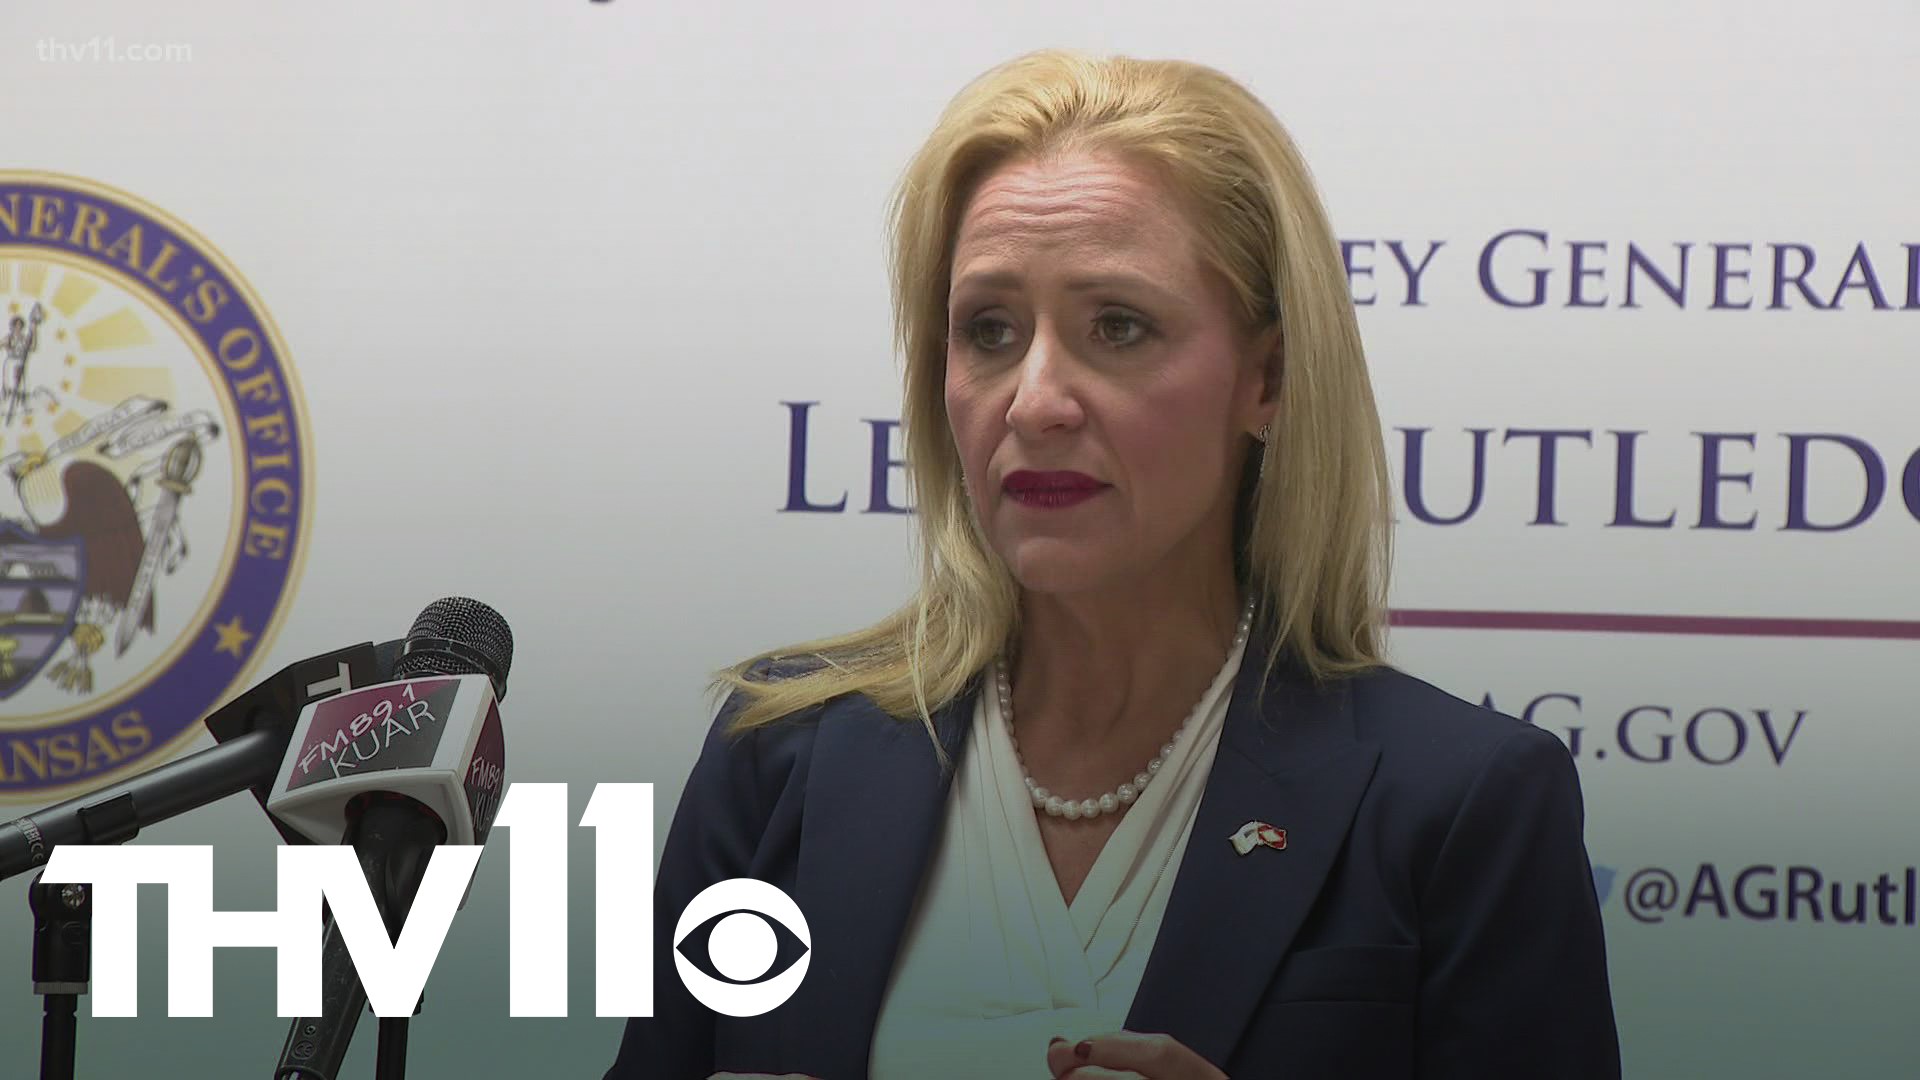 Insulin prices are skyrocketing at the moment and Arkansas AG Leslie Rutledge said those costs are too high for those in the state.